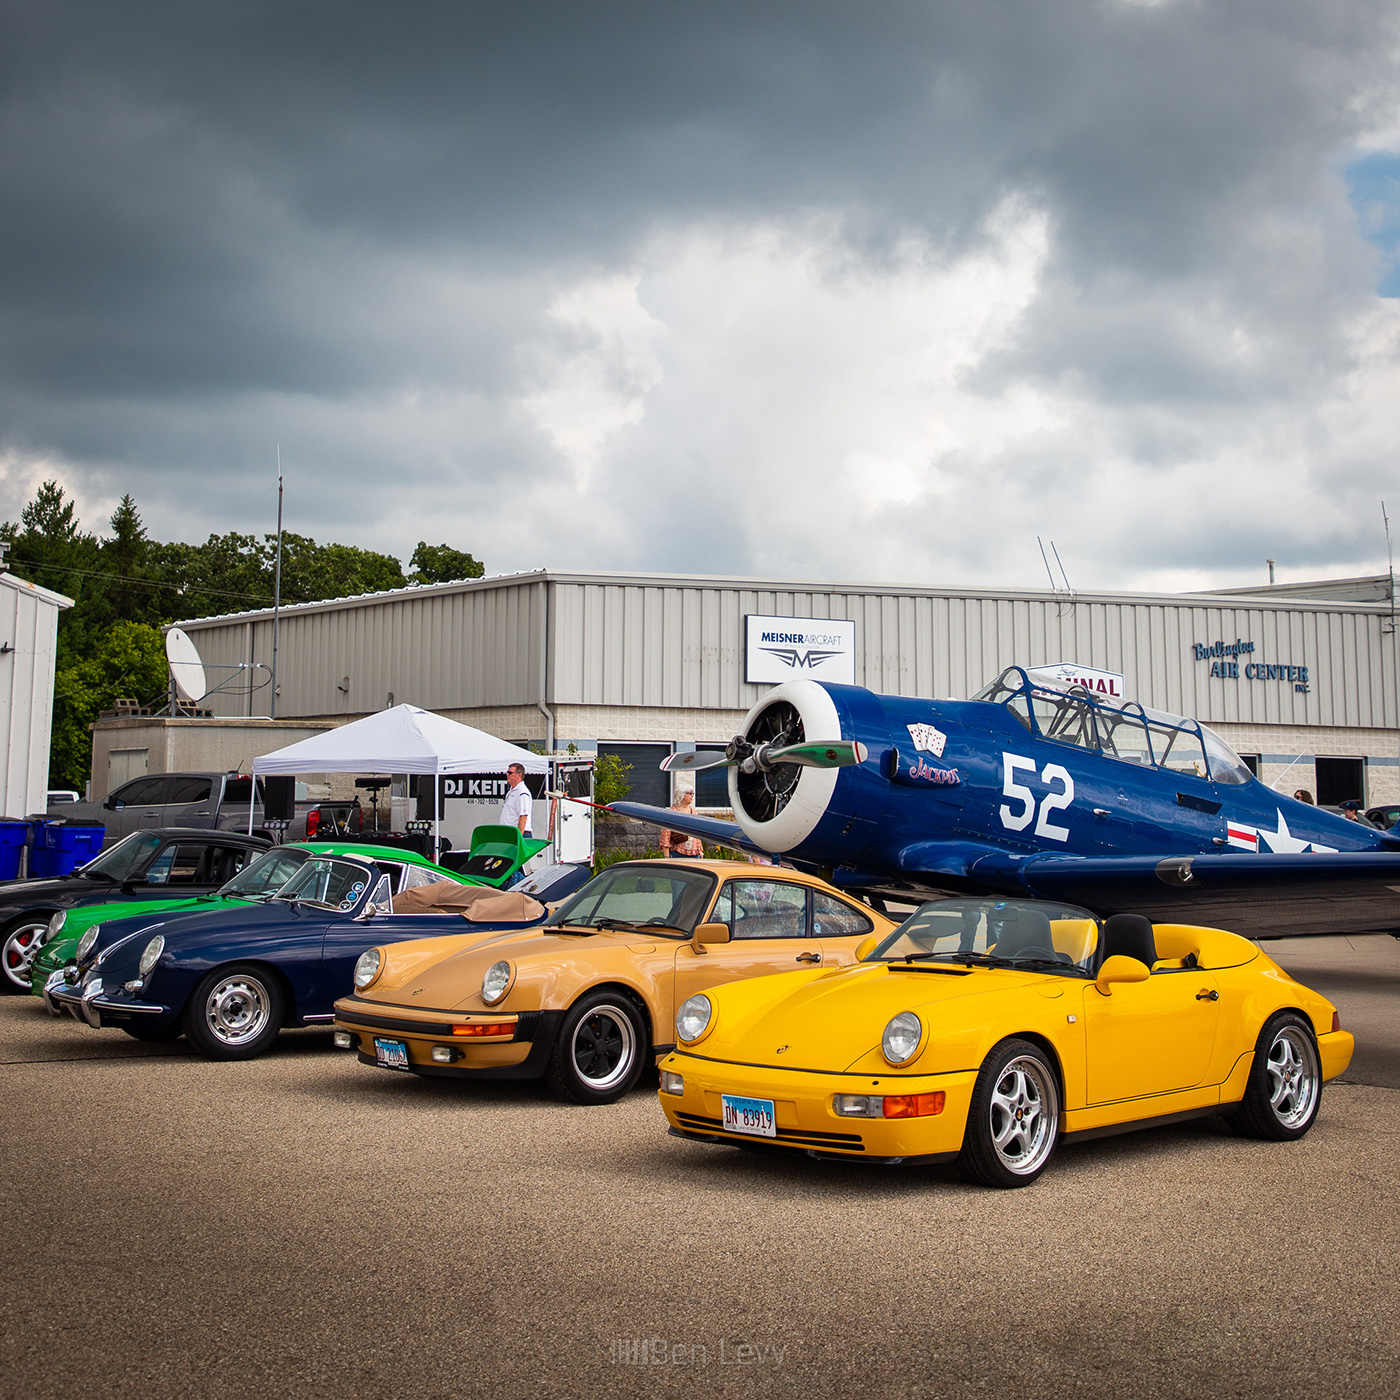 Air-cooled Porsches on Display with a Plane